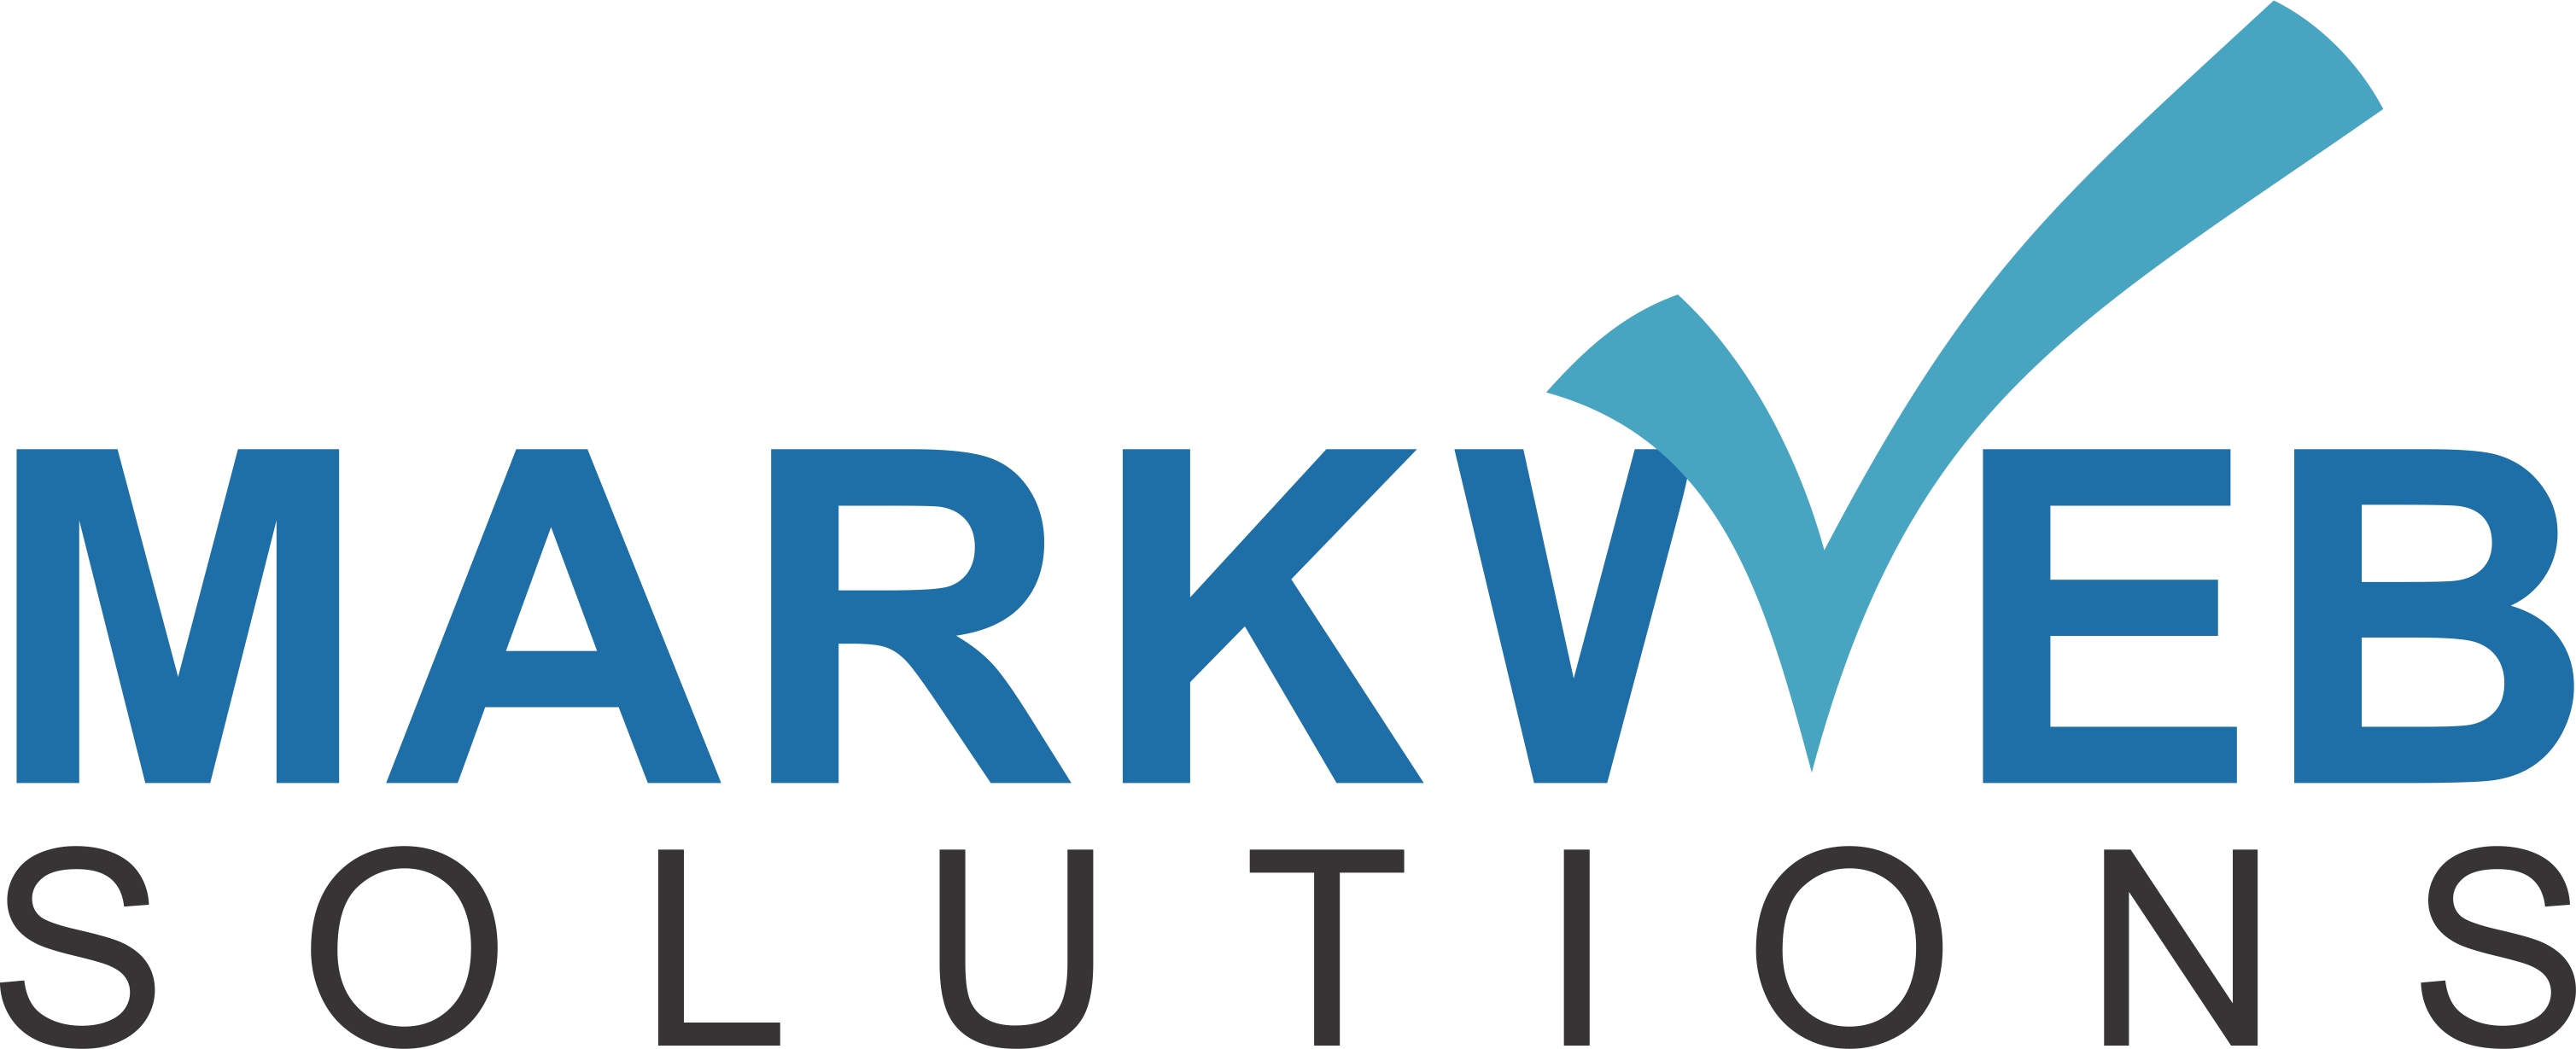 Mark Web Solutions profile on Qualified.One